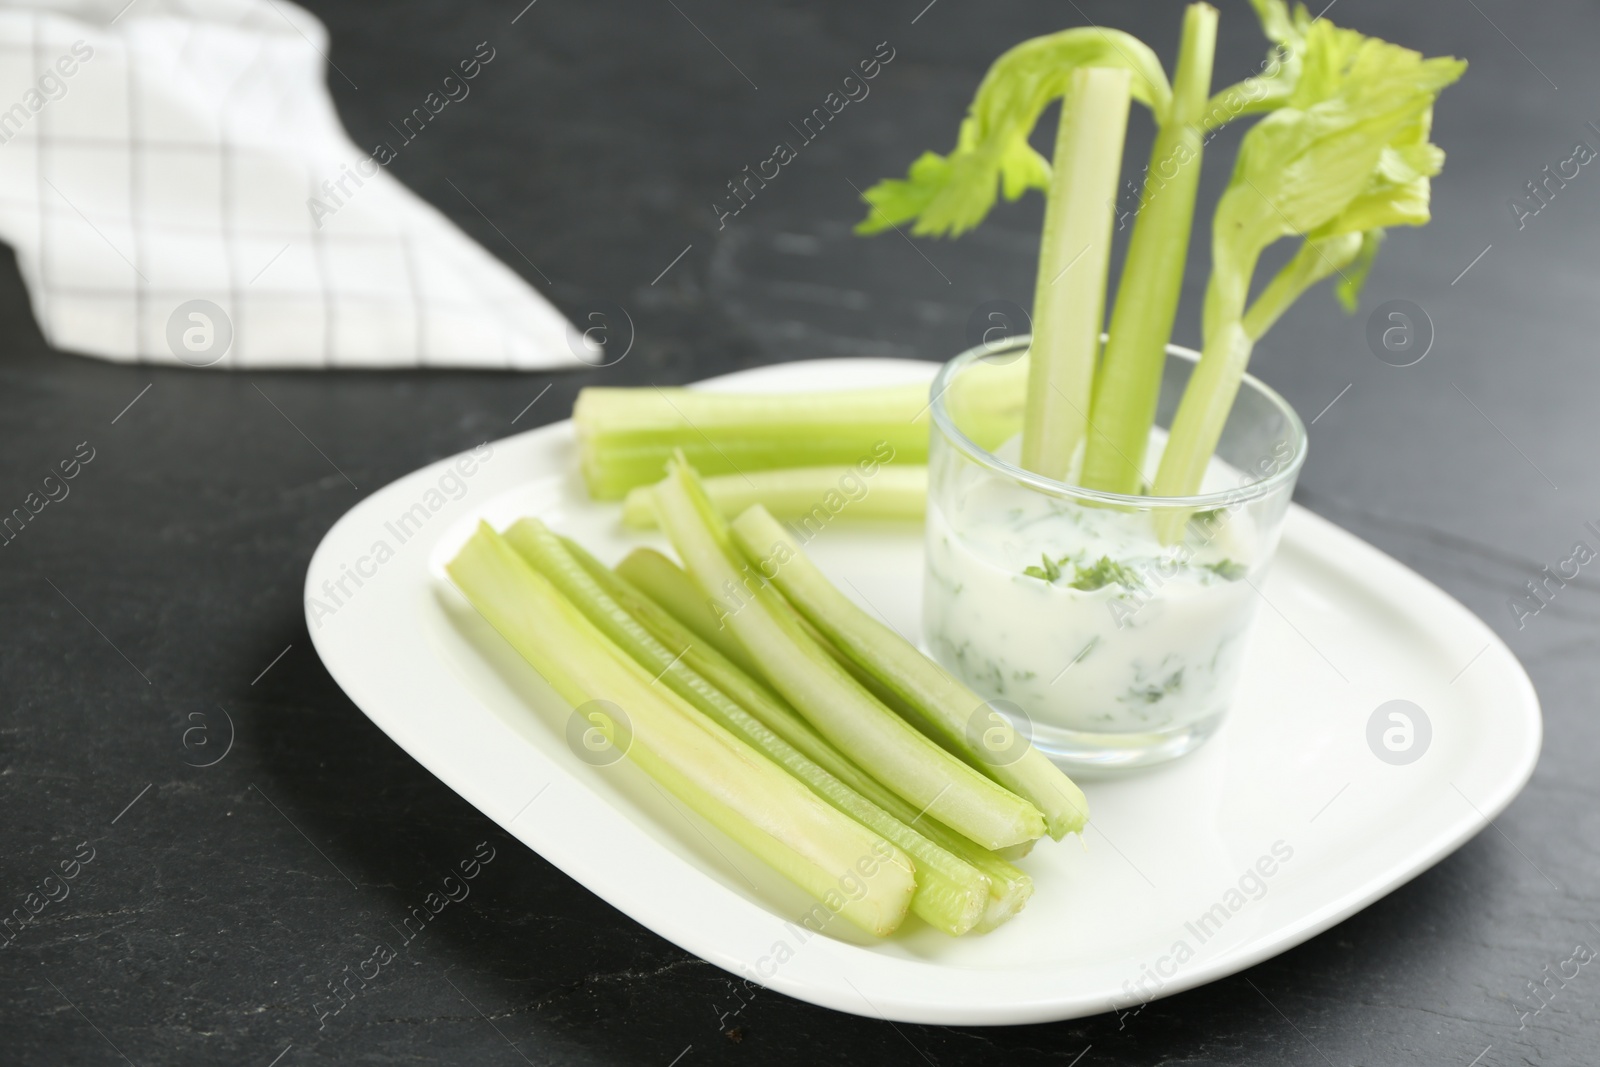 Photo of Celery sticks with dip sauce in glass on black table, closeup